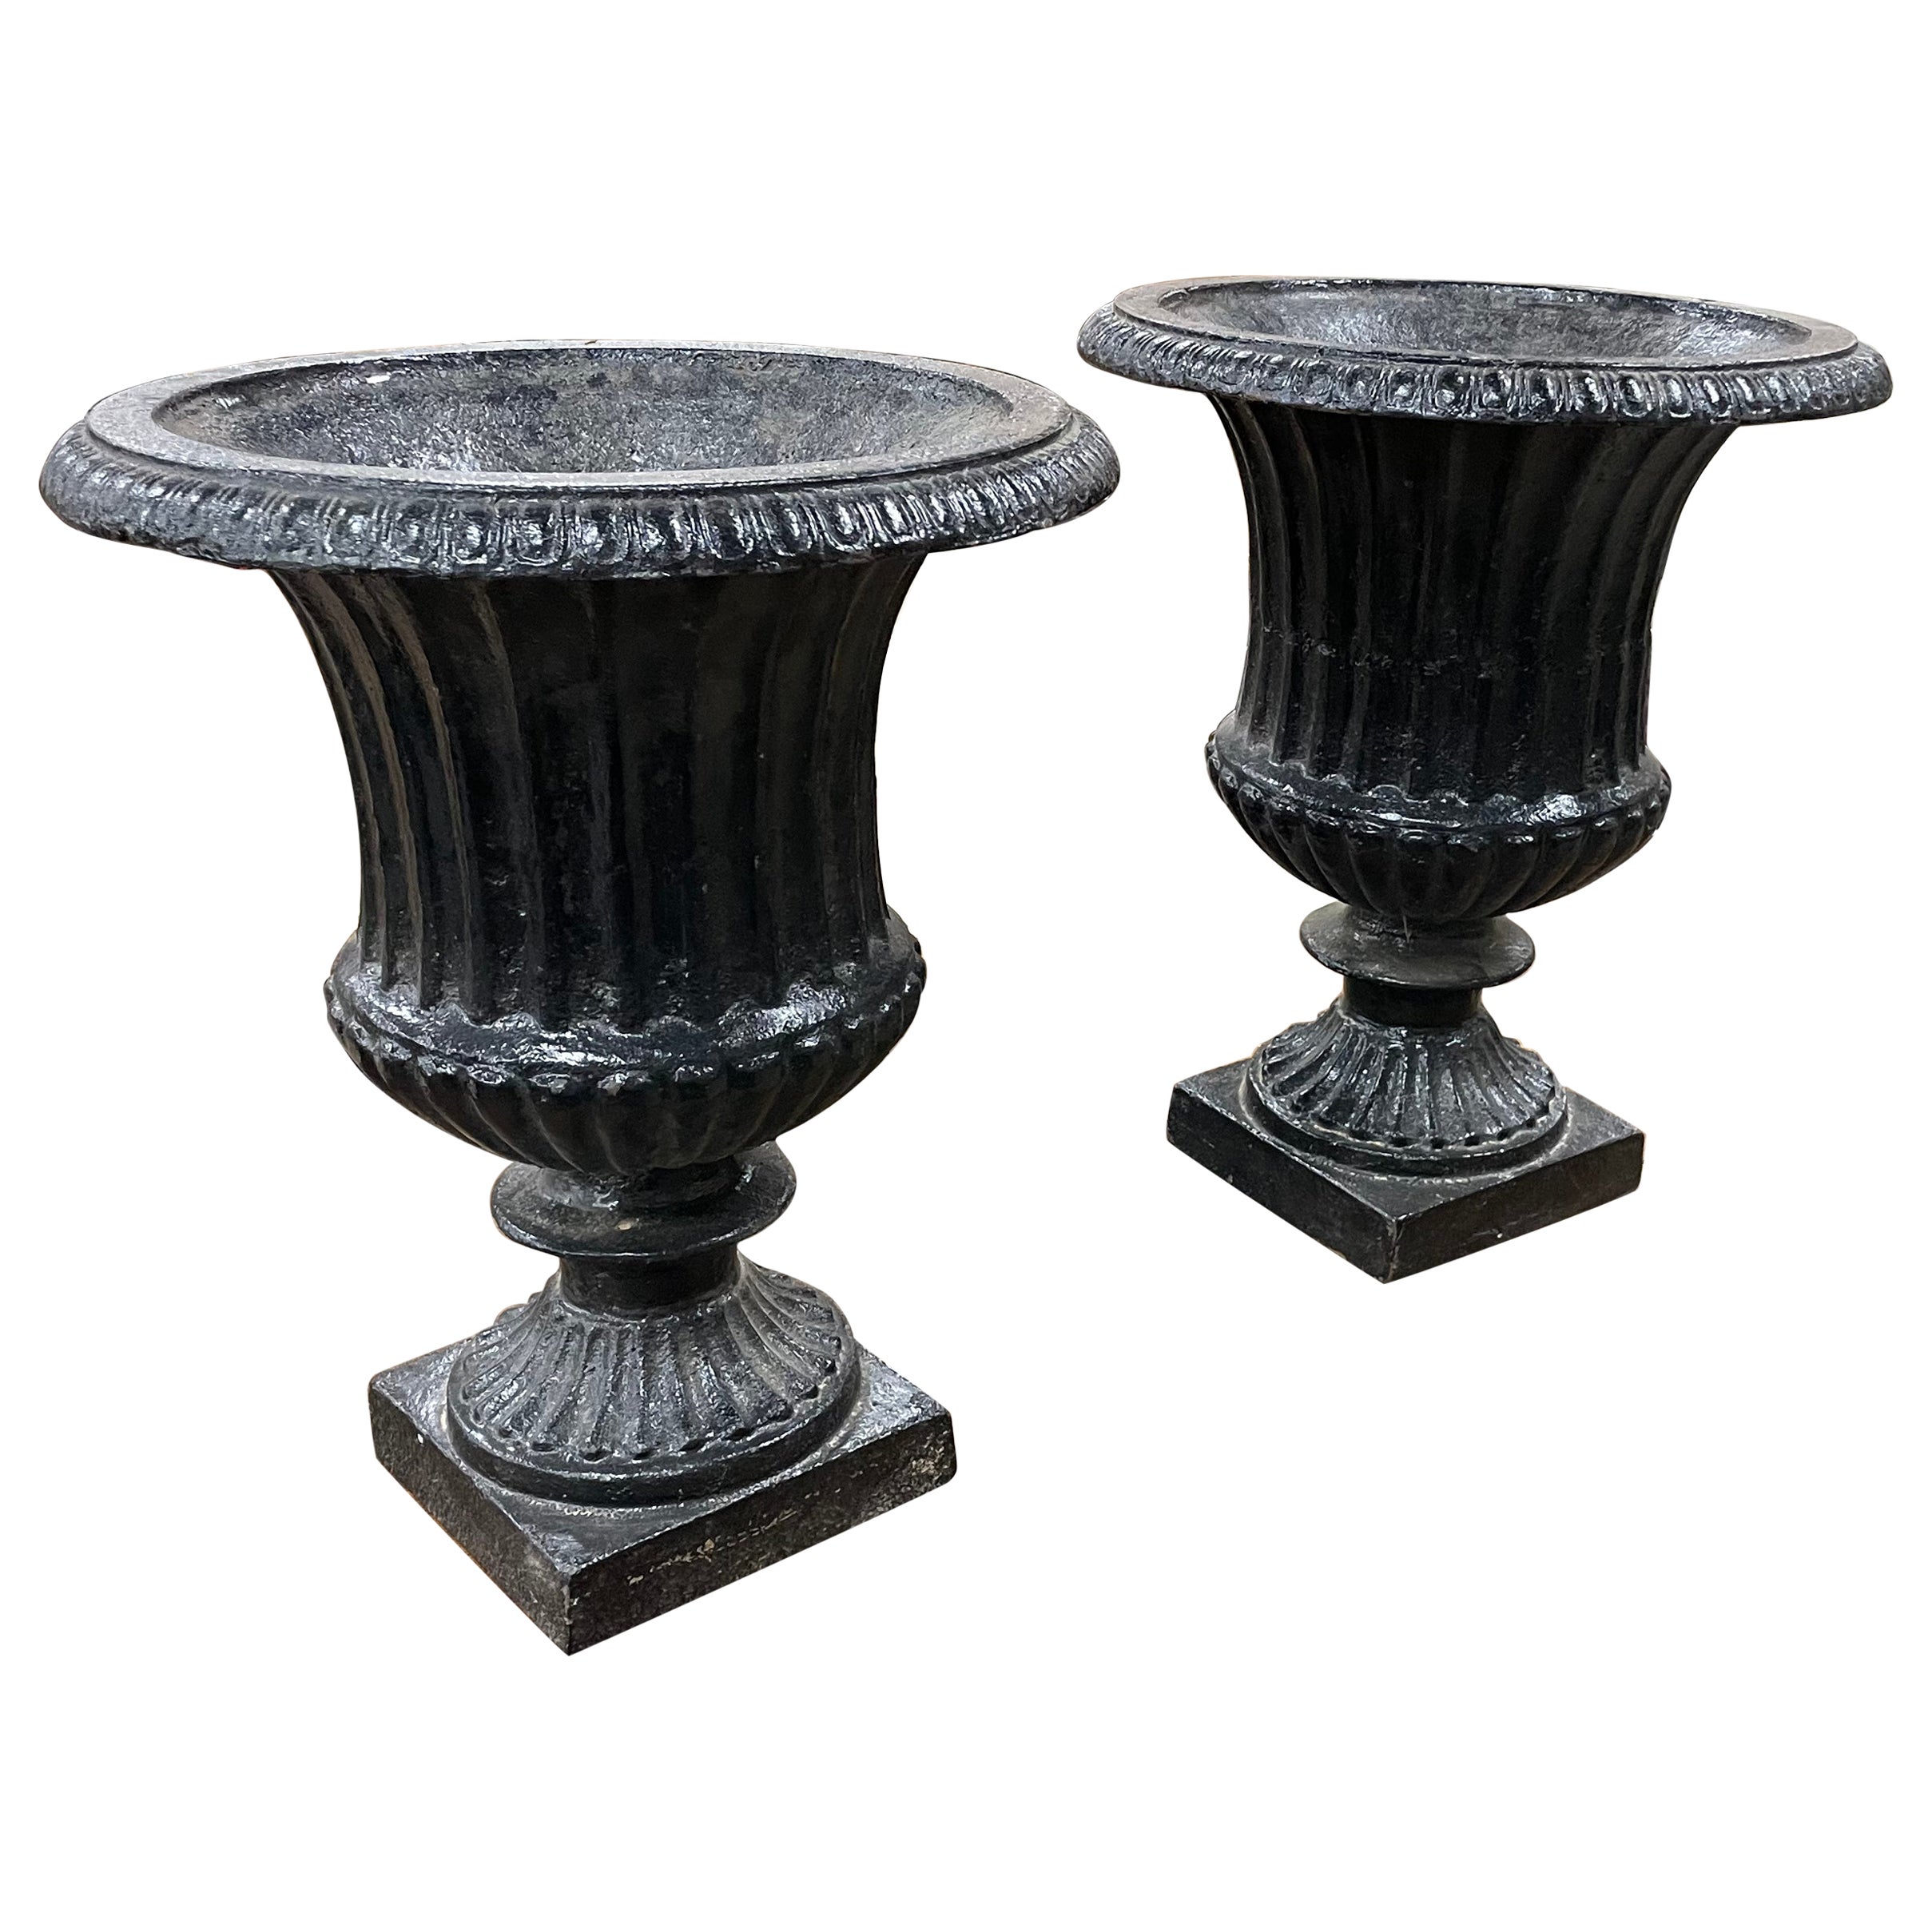 Pair of Antique English Cast Iron Urns For Sale